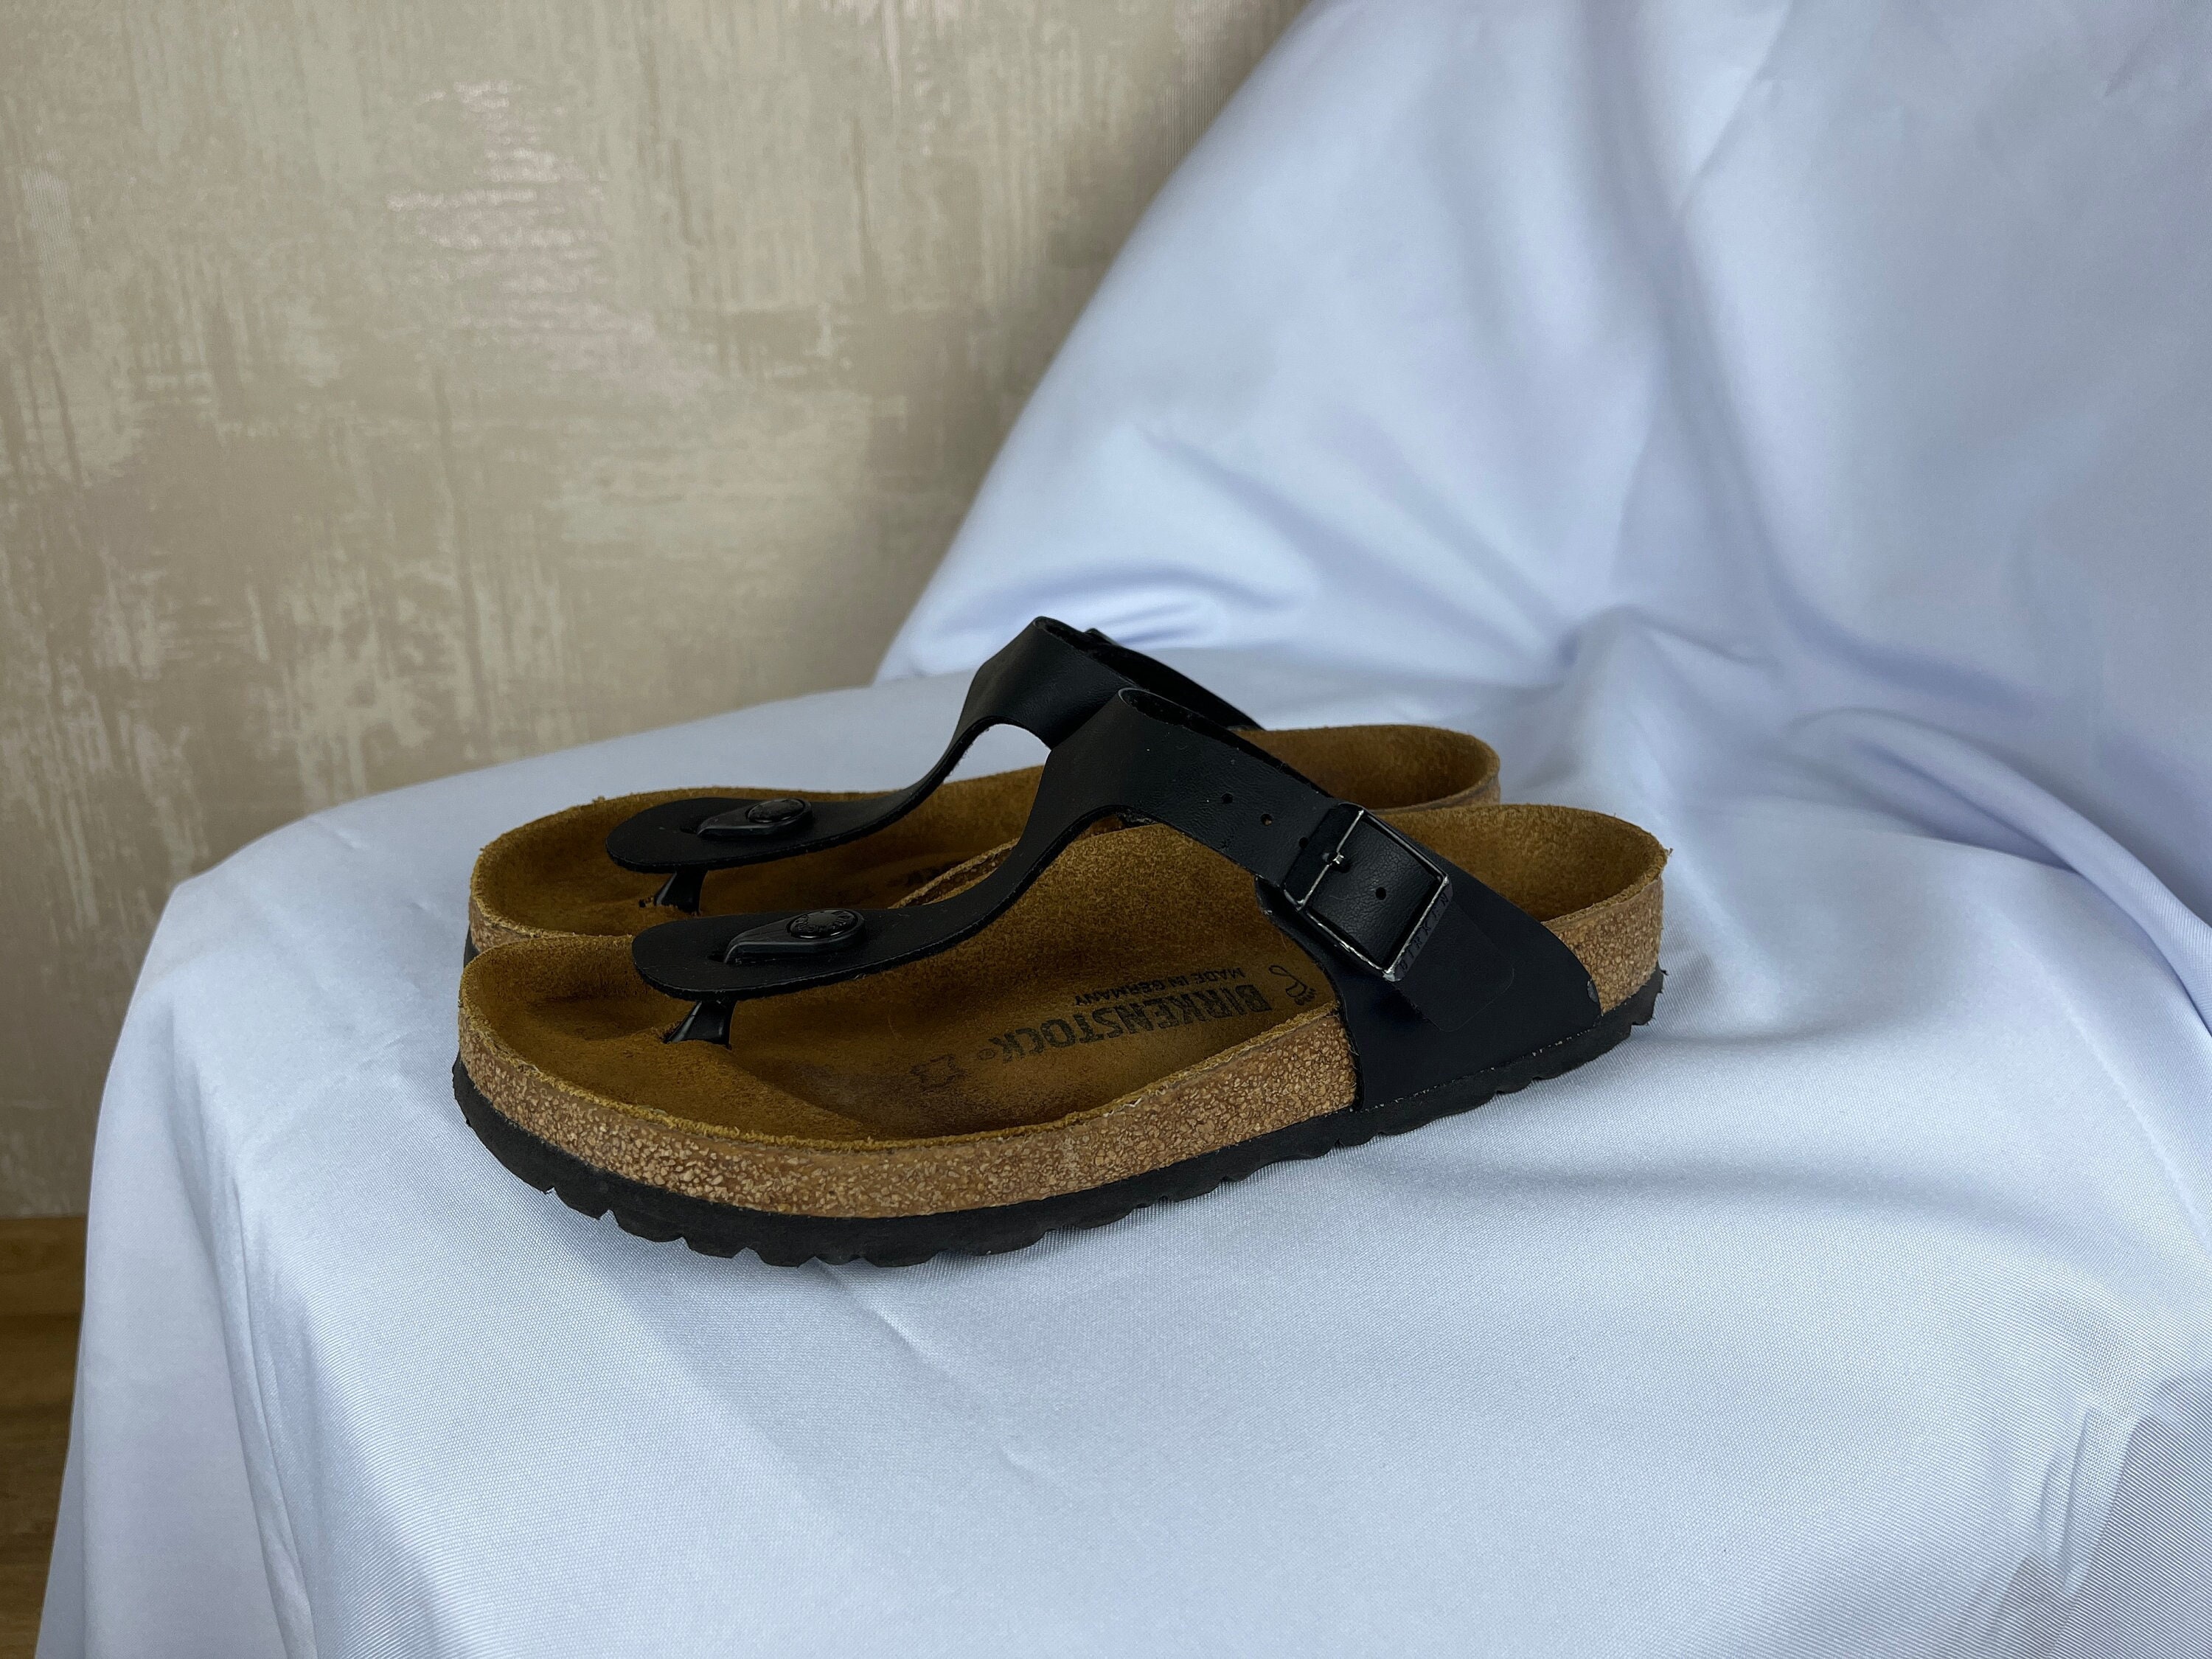 In Stock】Made in Germany Birkenstock Sandals Slippers NOUs